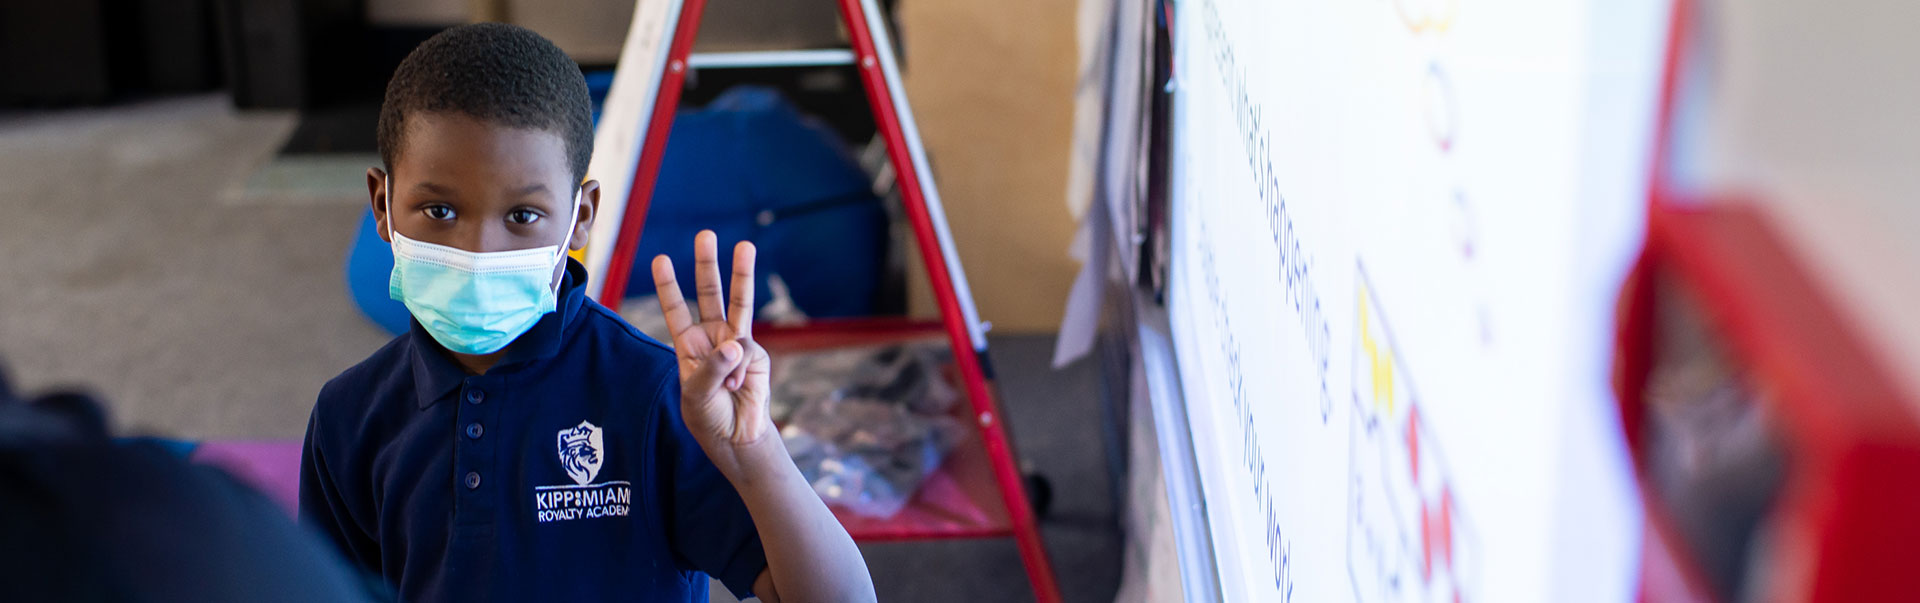 young student in classroom waving to camera